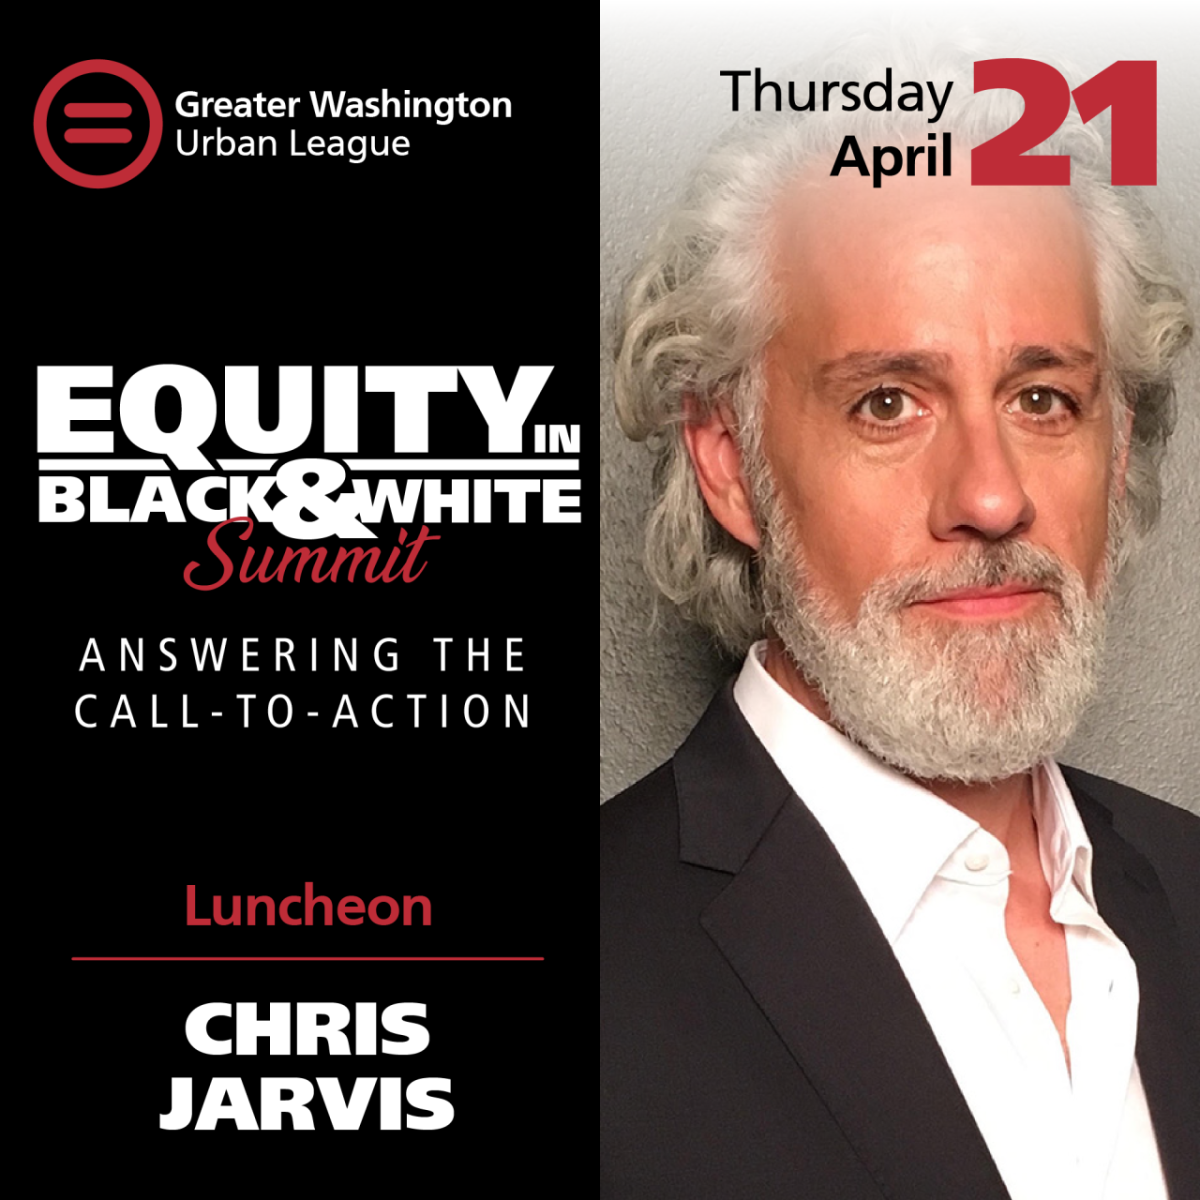 Equity in Black and White Summit: Answering the Call-to-Action